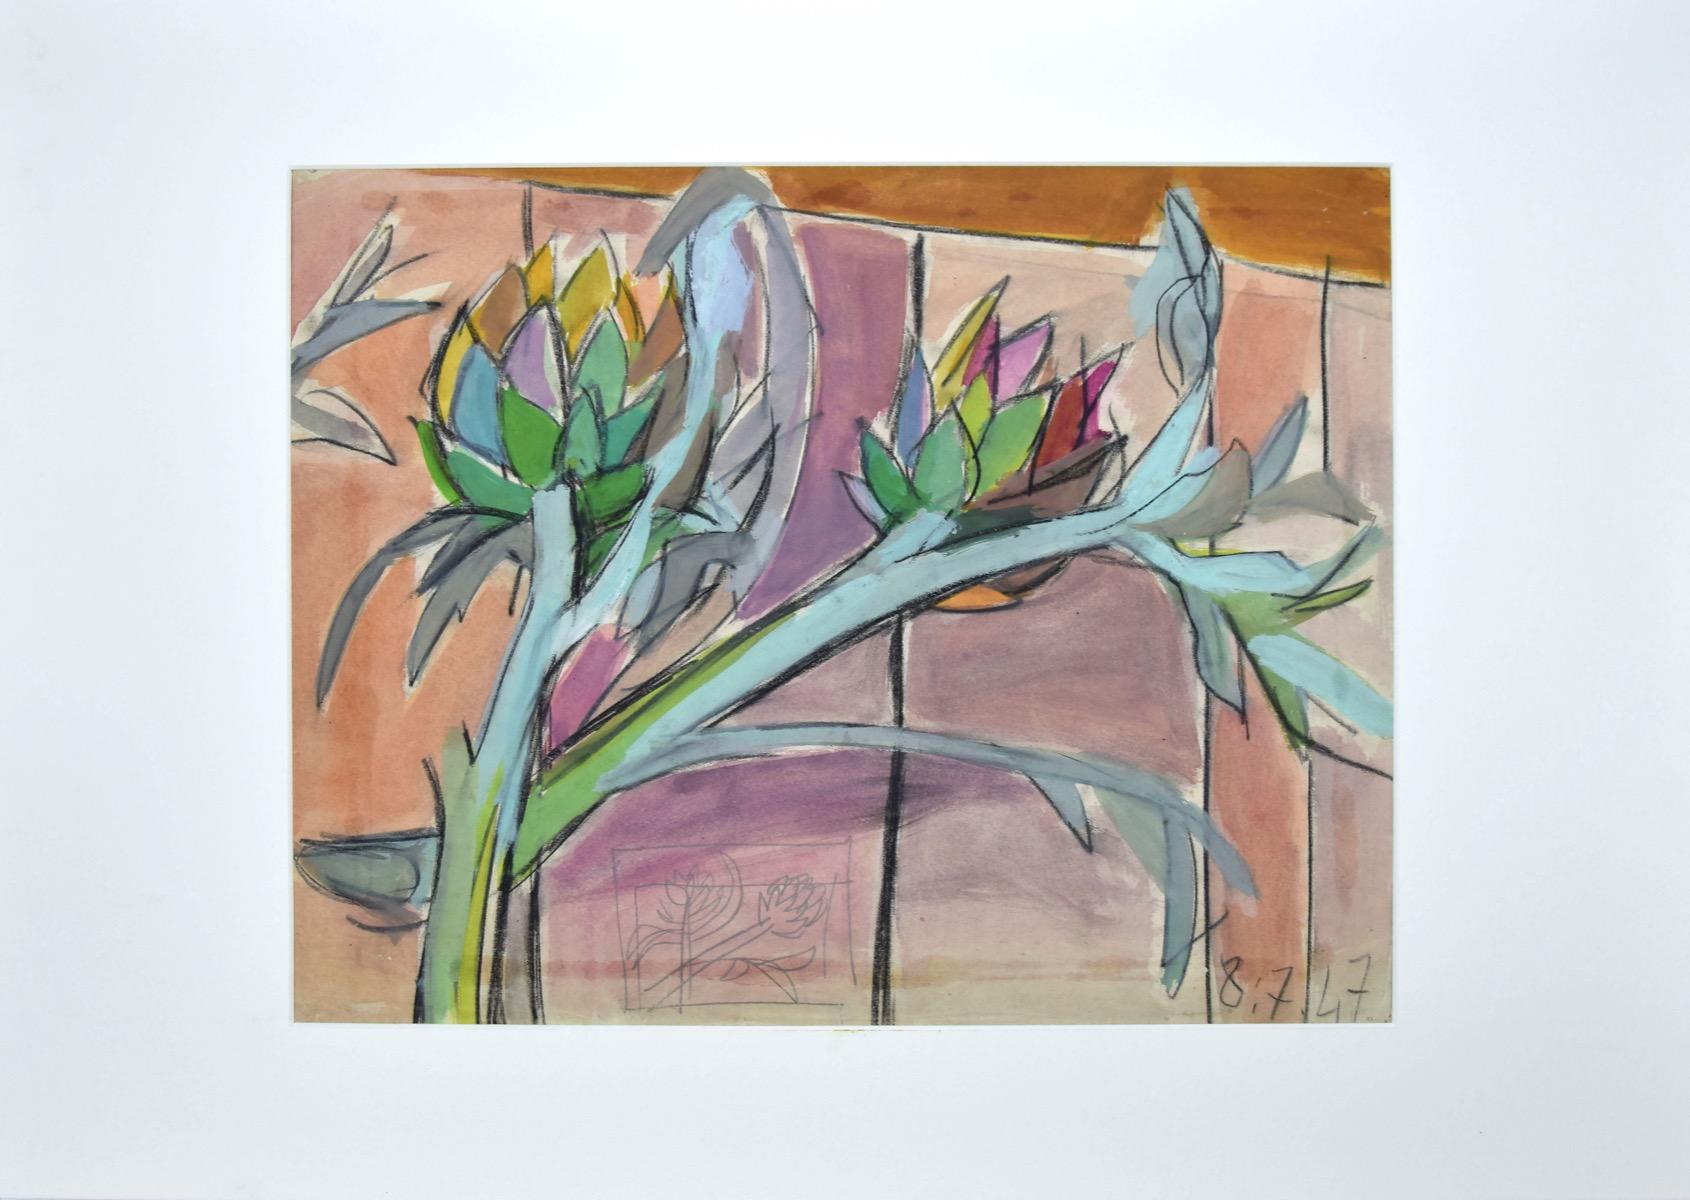 Unknown Still-Life - Tropical Vegetation - Original Pencil and Watercolor - 1917